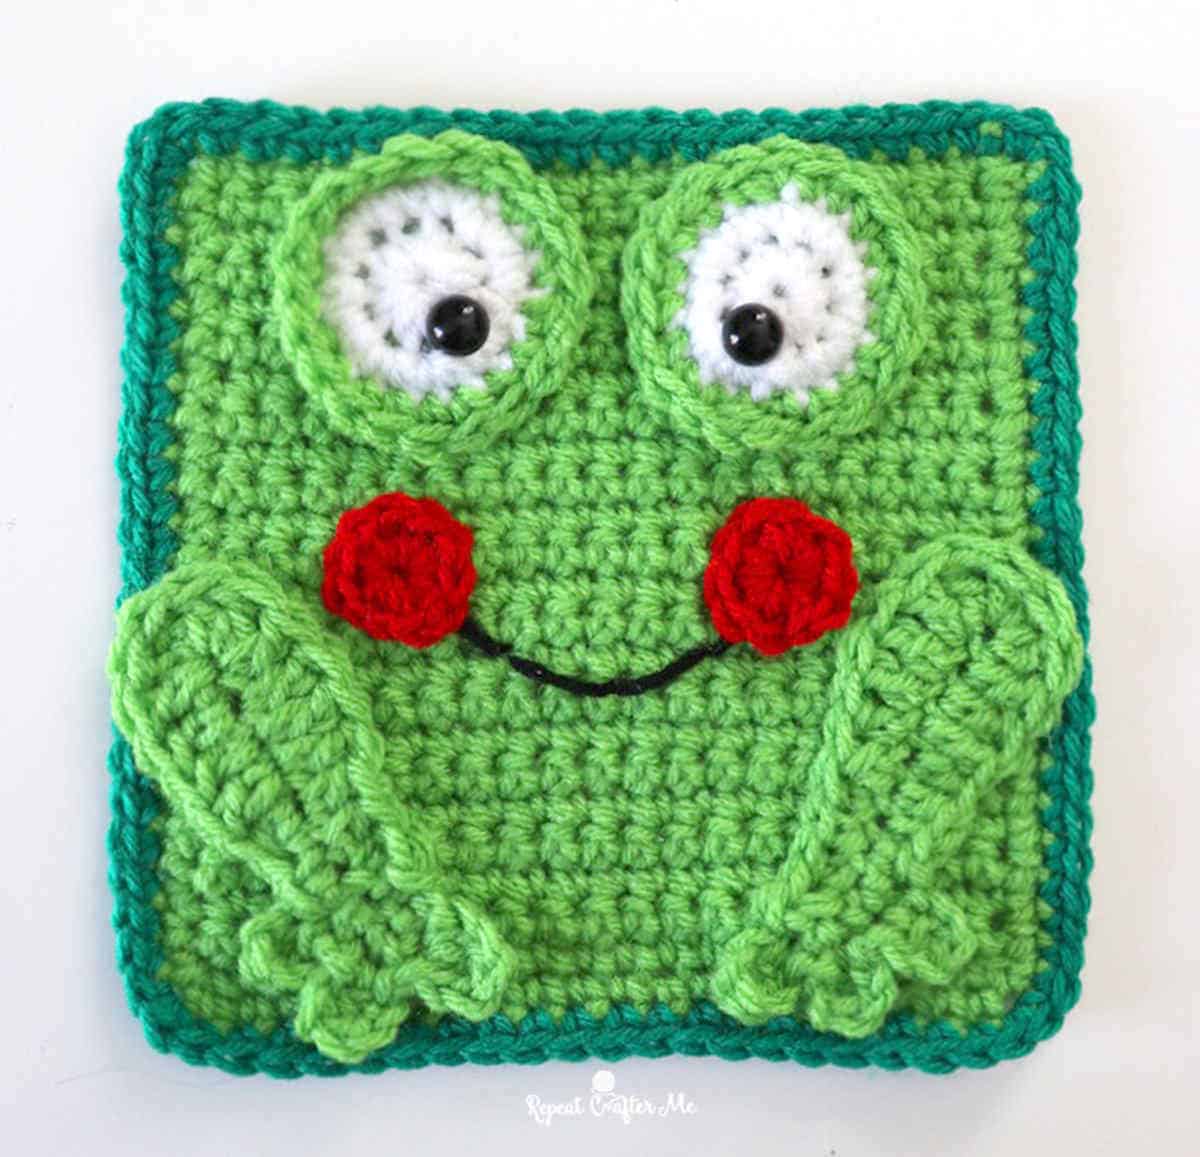 Crocheted frog square.